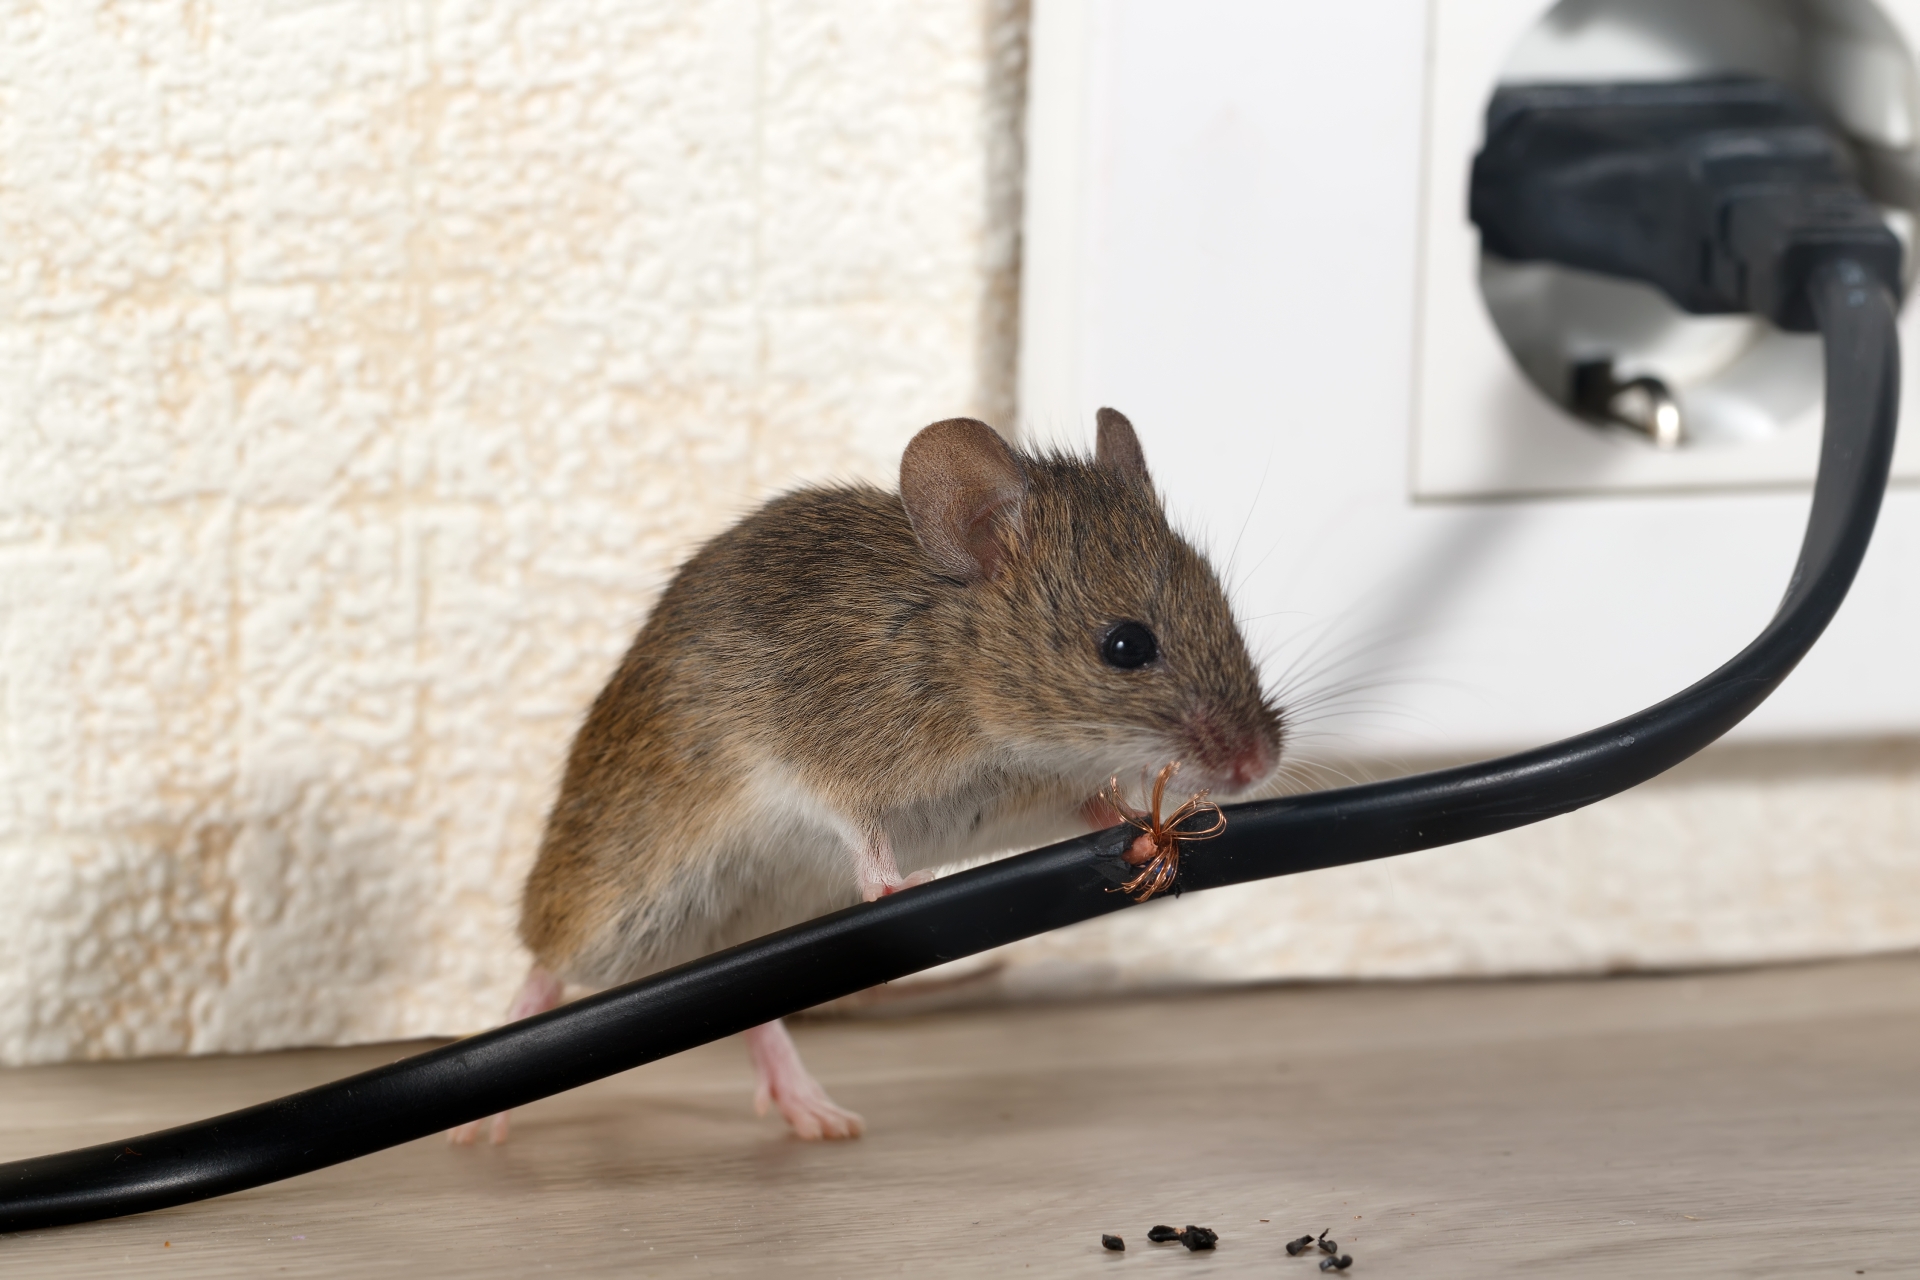 Mice Infestation, Pest Control in Headley, KT18. Call Now 020 8166 9746